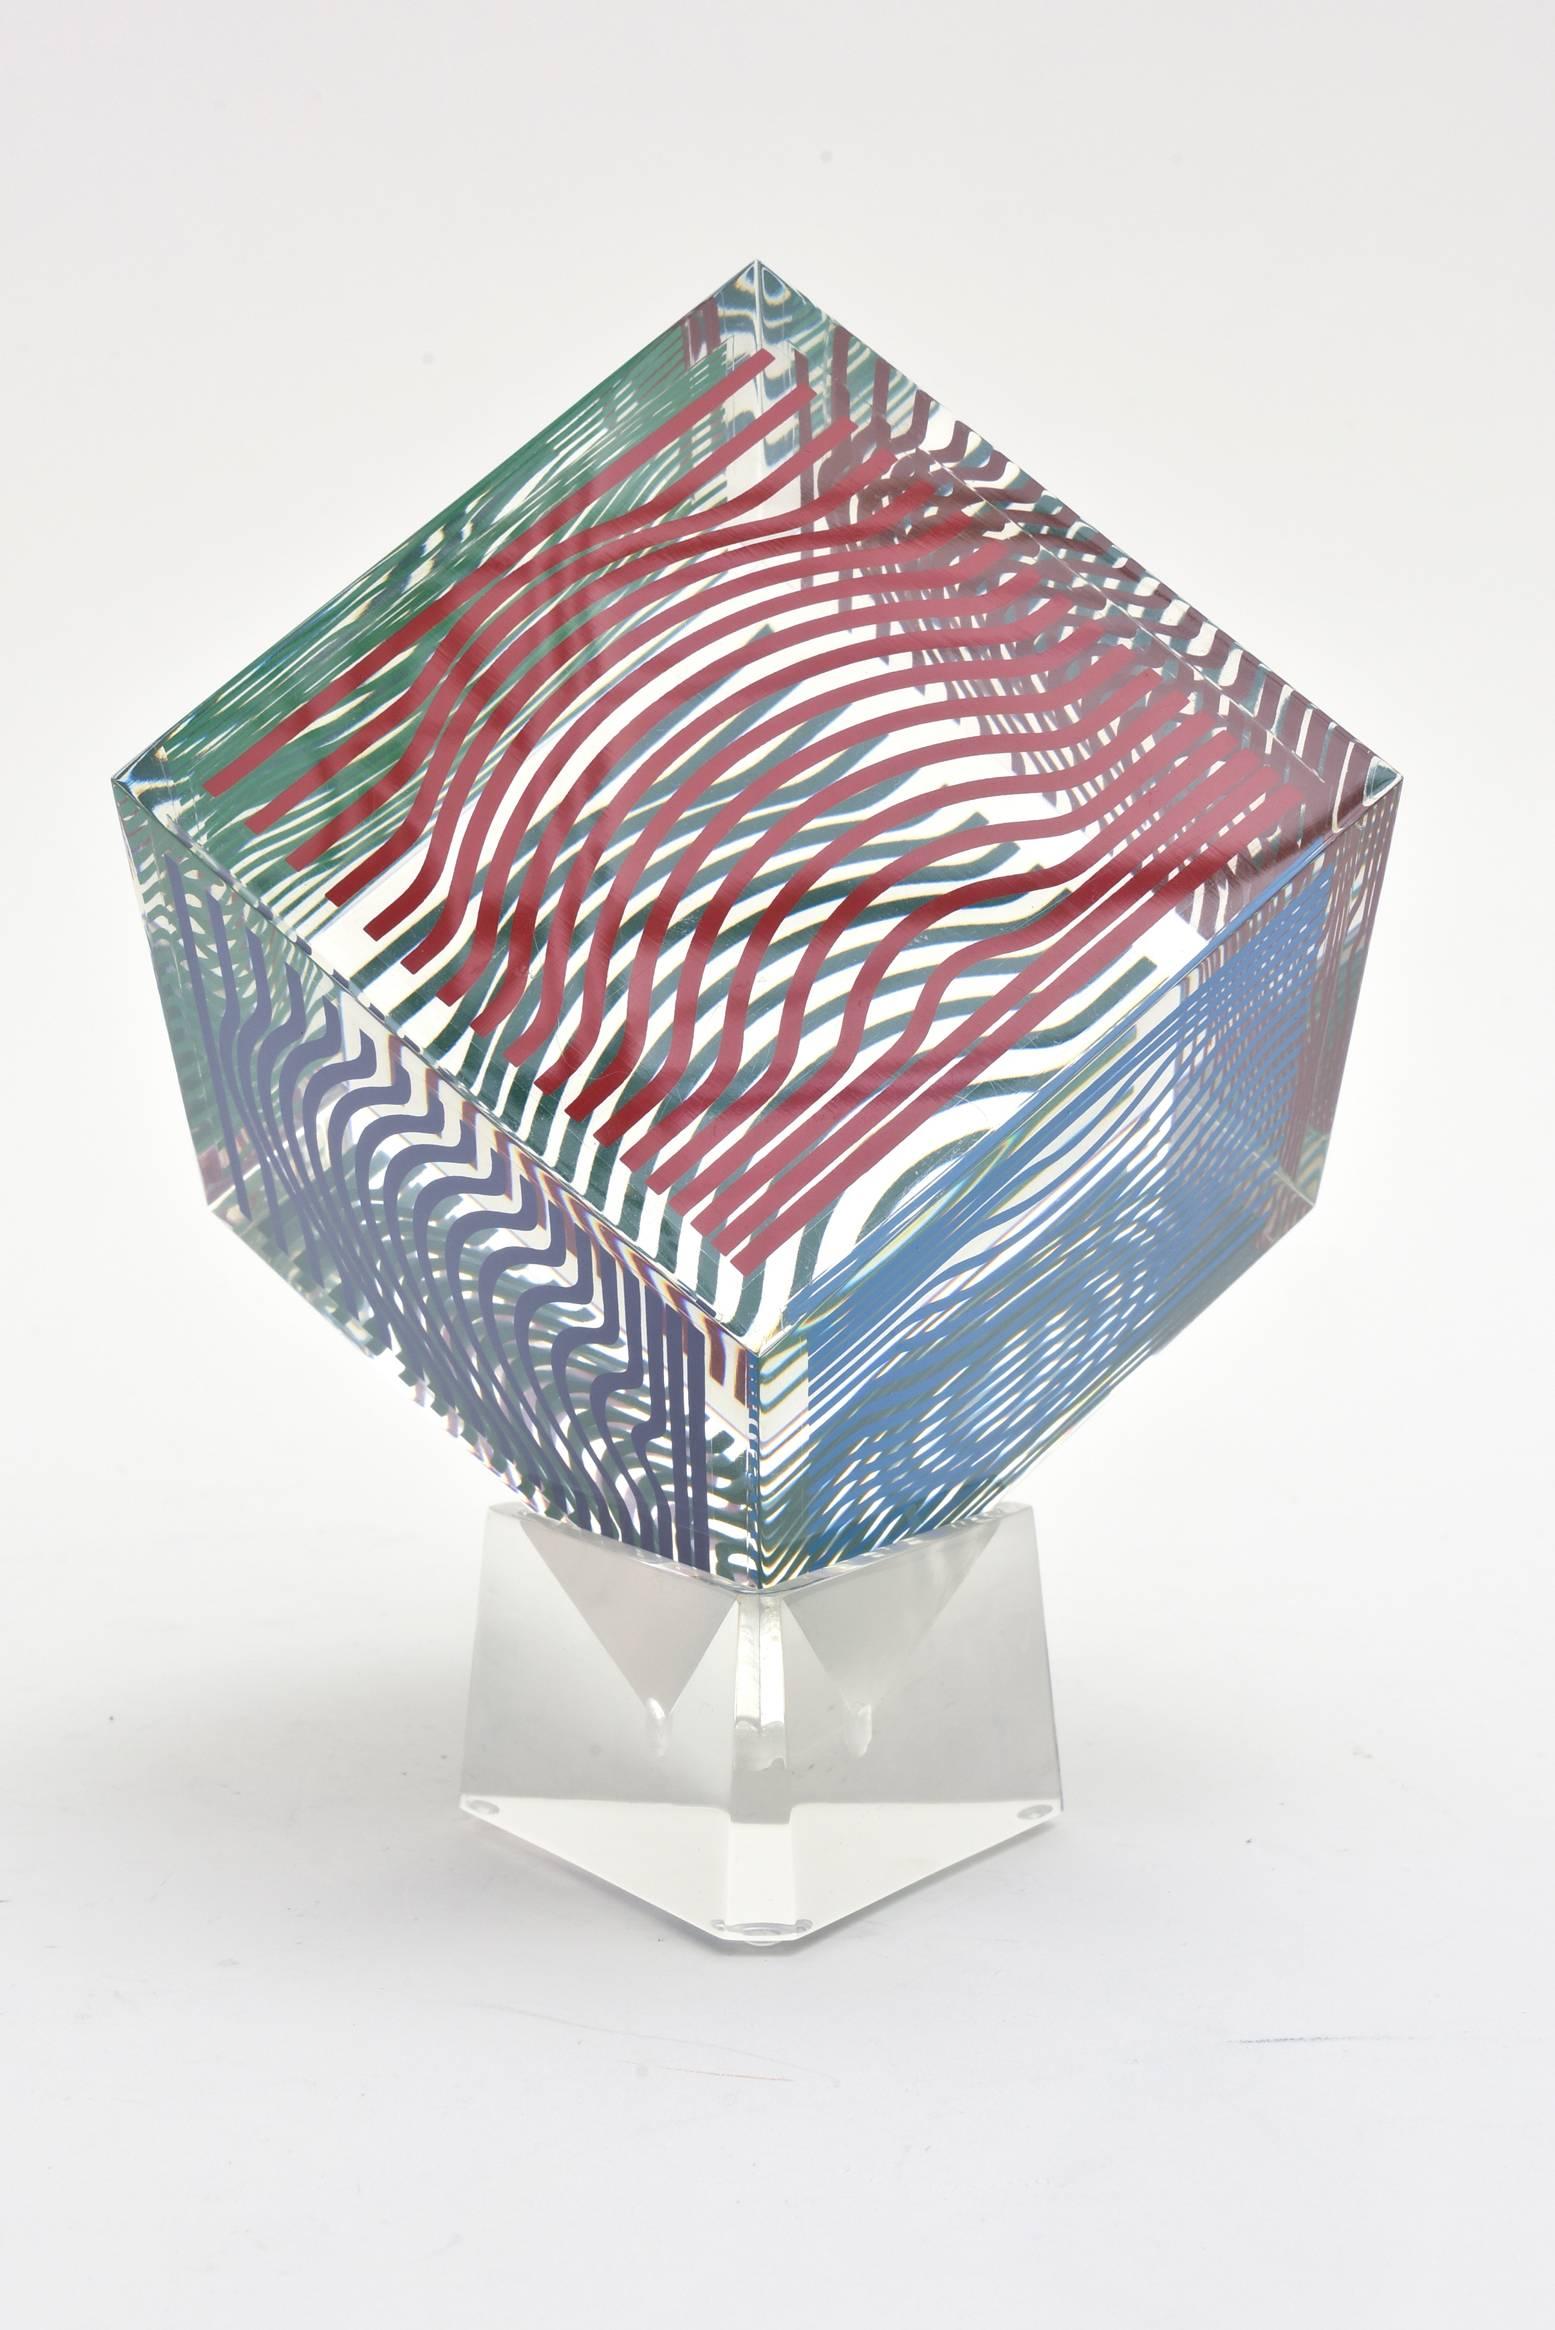 This four sided every changing graphic optical Op Art lucite vintage cube sculpture by Victor Vasarely is vintage from the 1970s. They were produced in a large edition at the time but not numbered. It is a silkscreen acrylic. It is not signed but